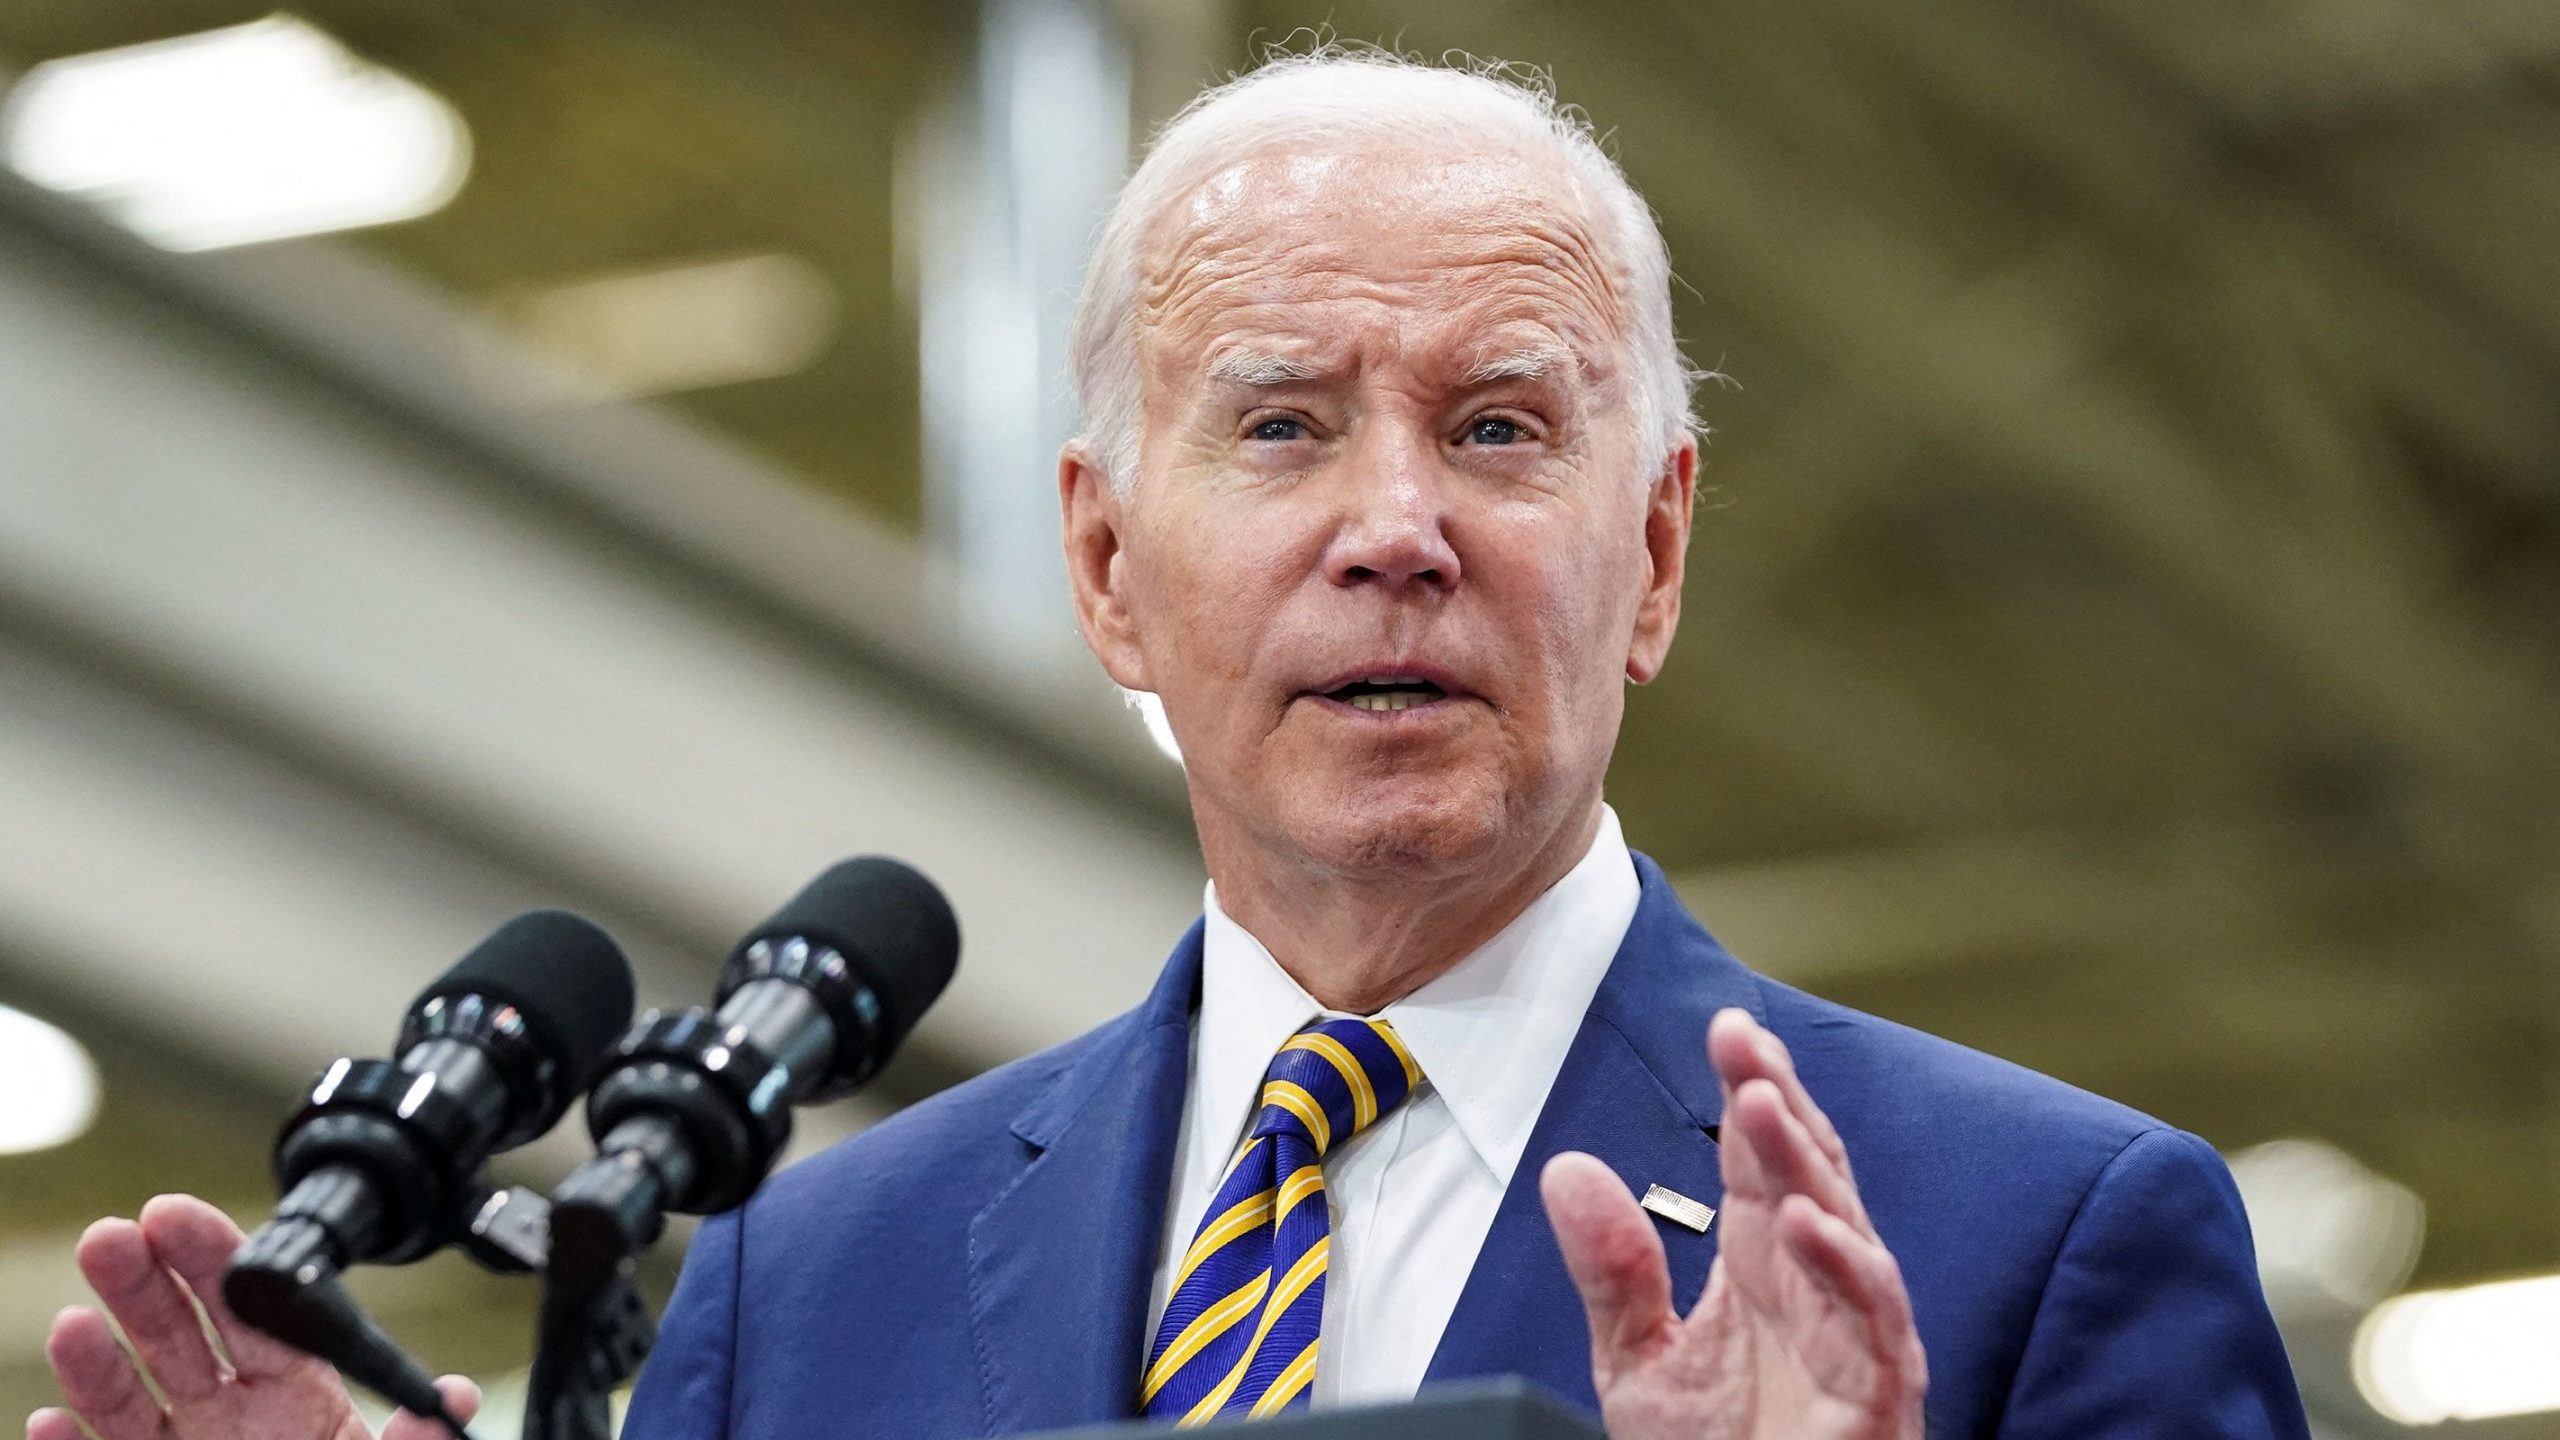 Biden's age and fitness raises concern among voters